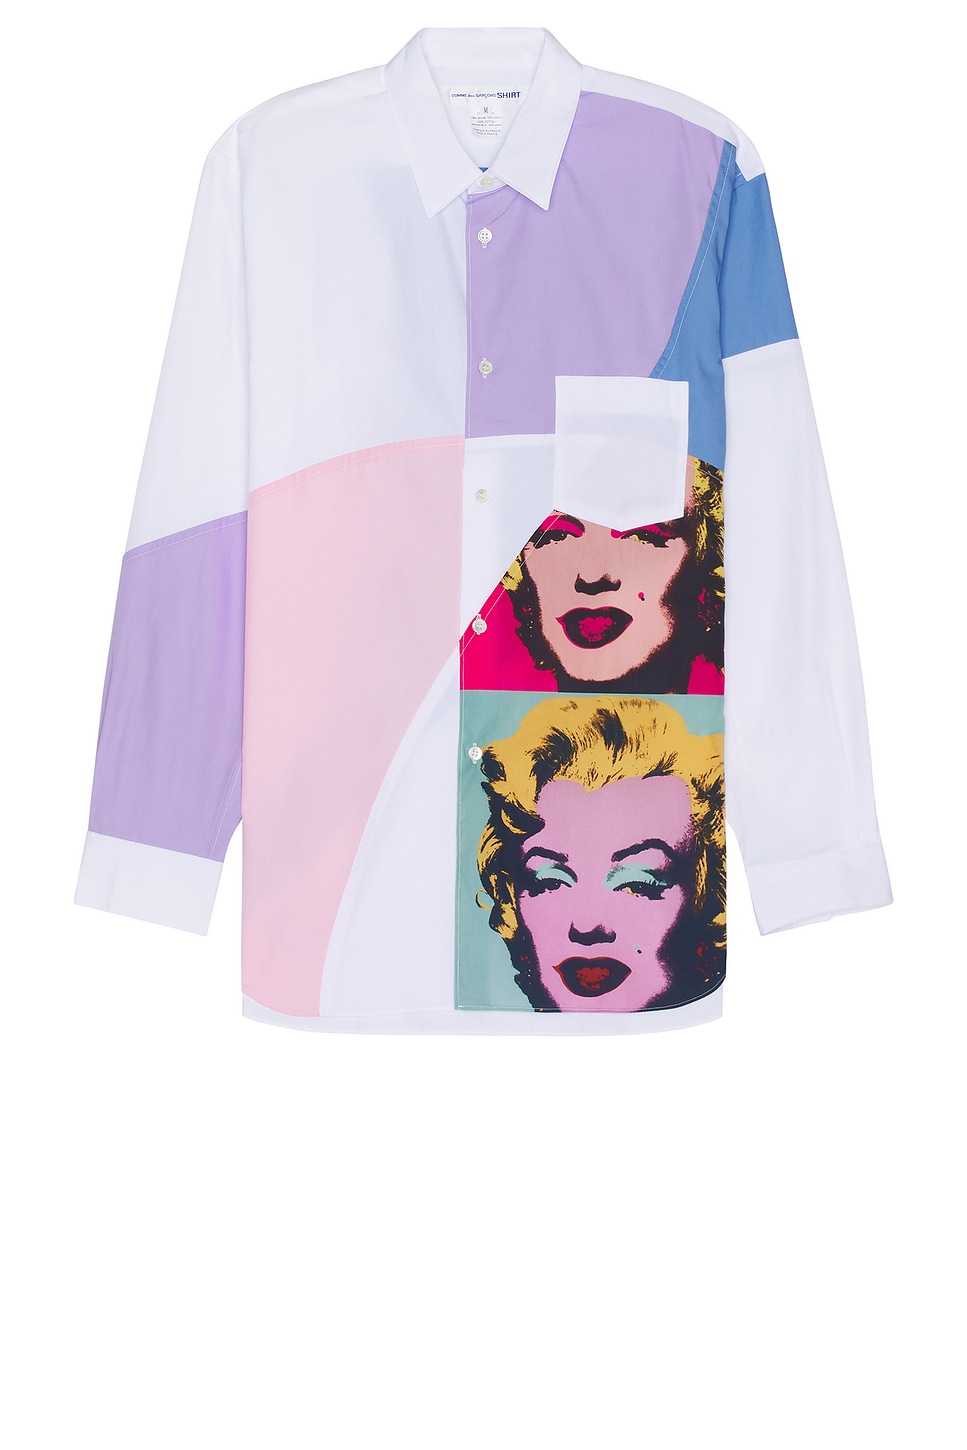 Image 1 of COMME des GARCONS SHIRT x Andy Warhol Shirt in White